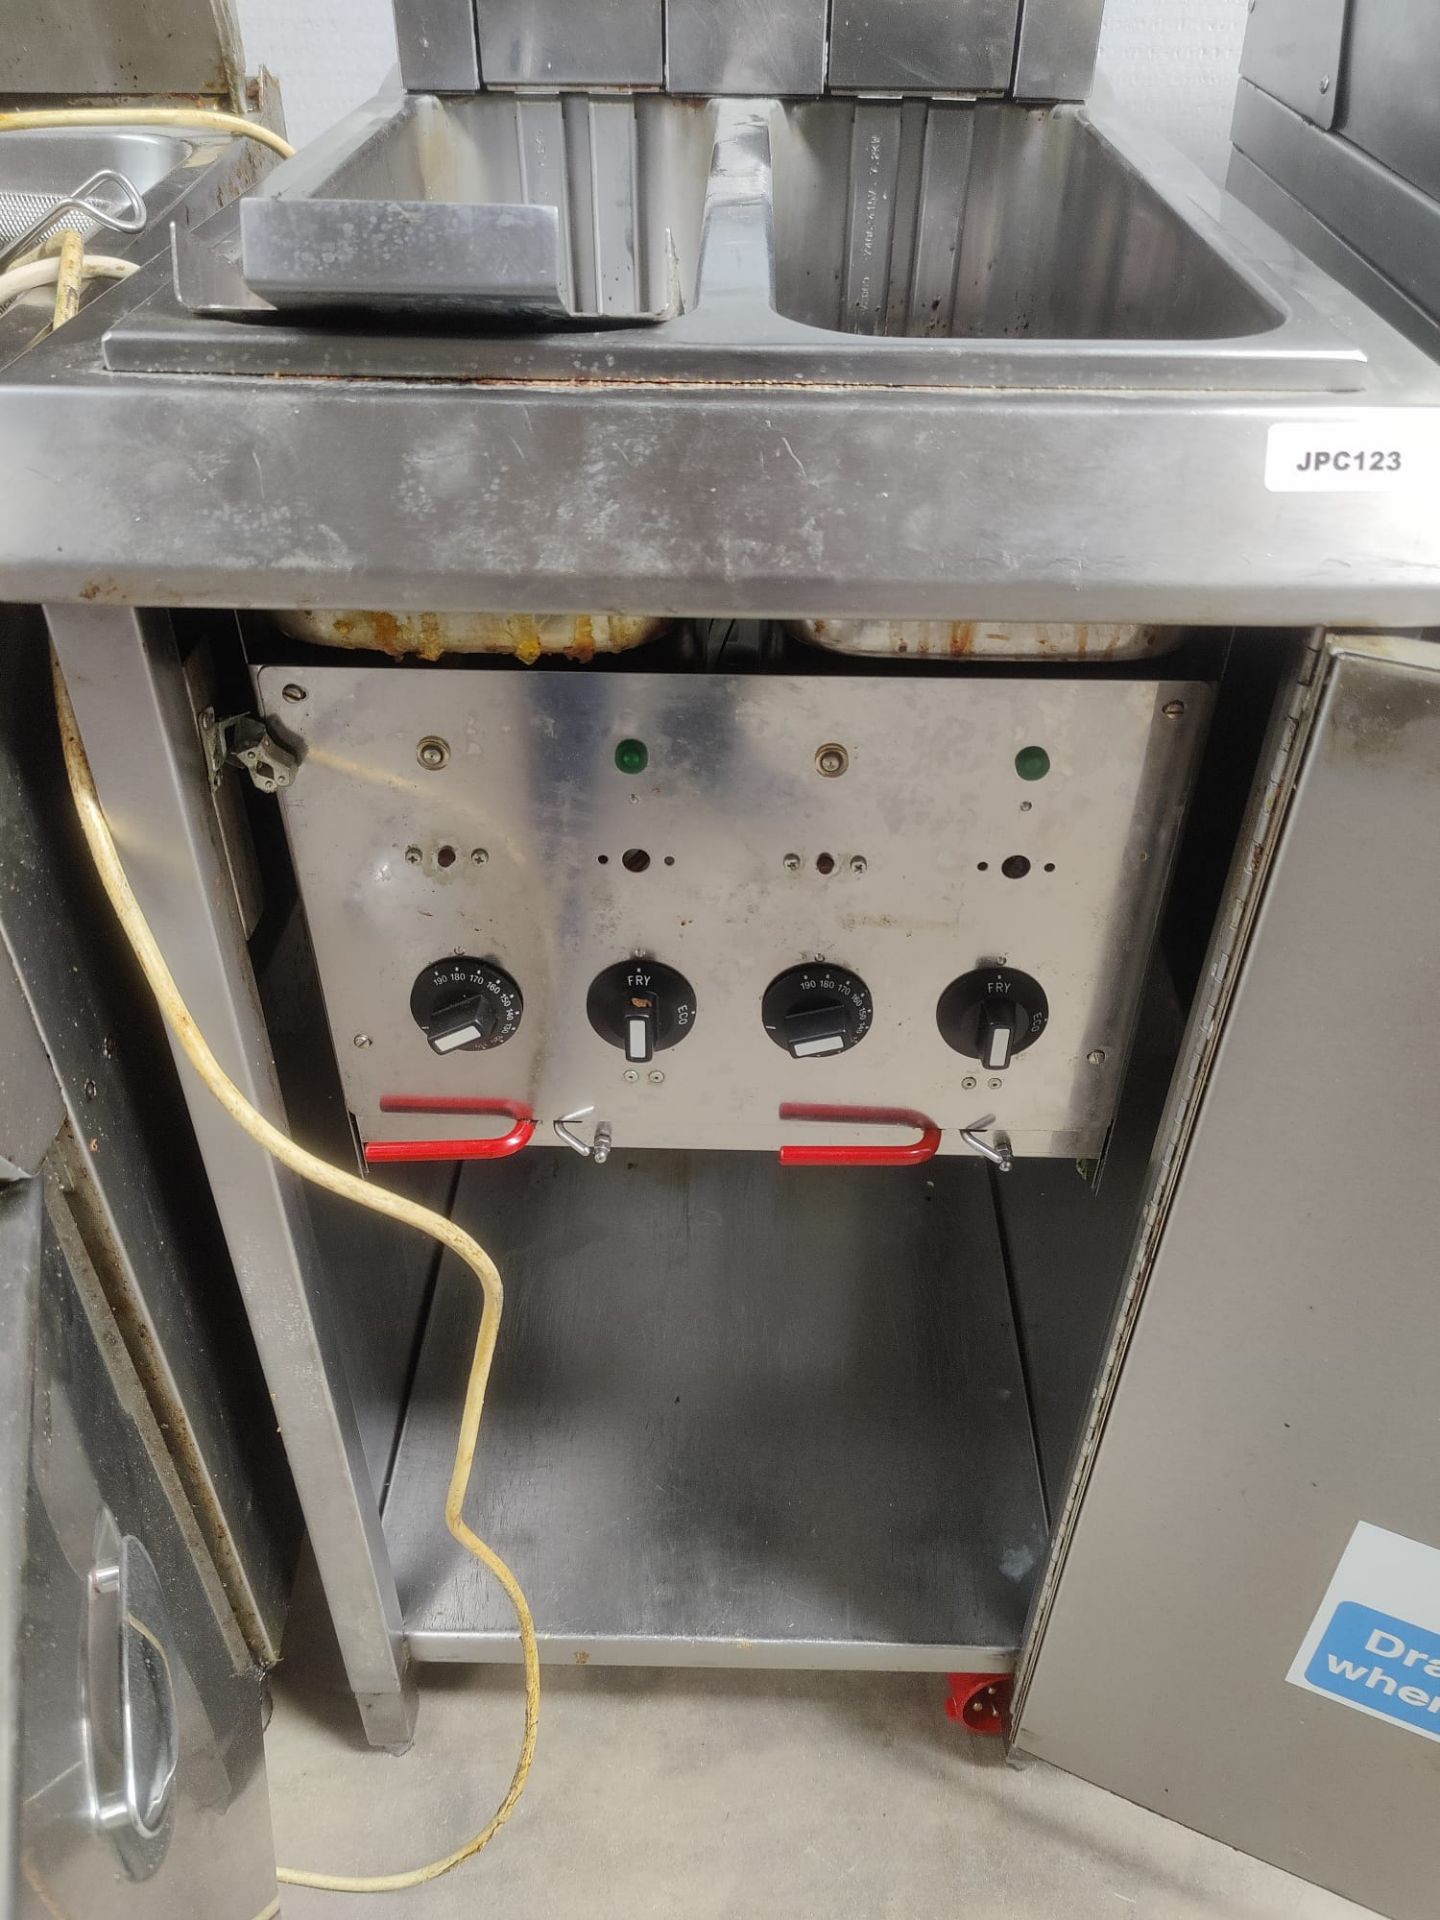 1 x Twin Tank Electric Fryer With Stainless Steel Exterior - 3 Phase - 47cm Width - Image 2 of 2